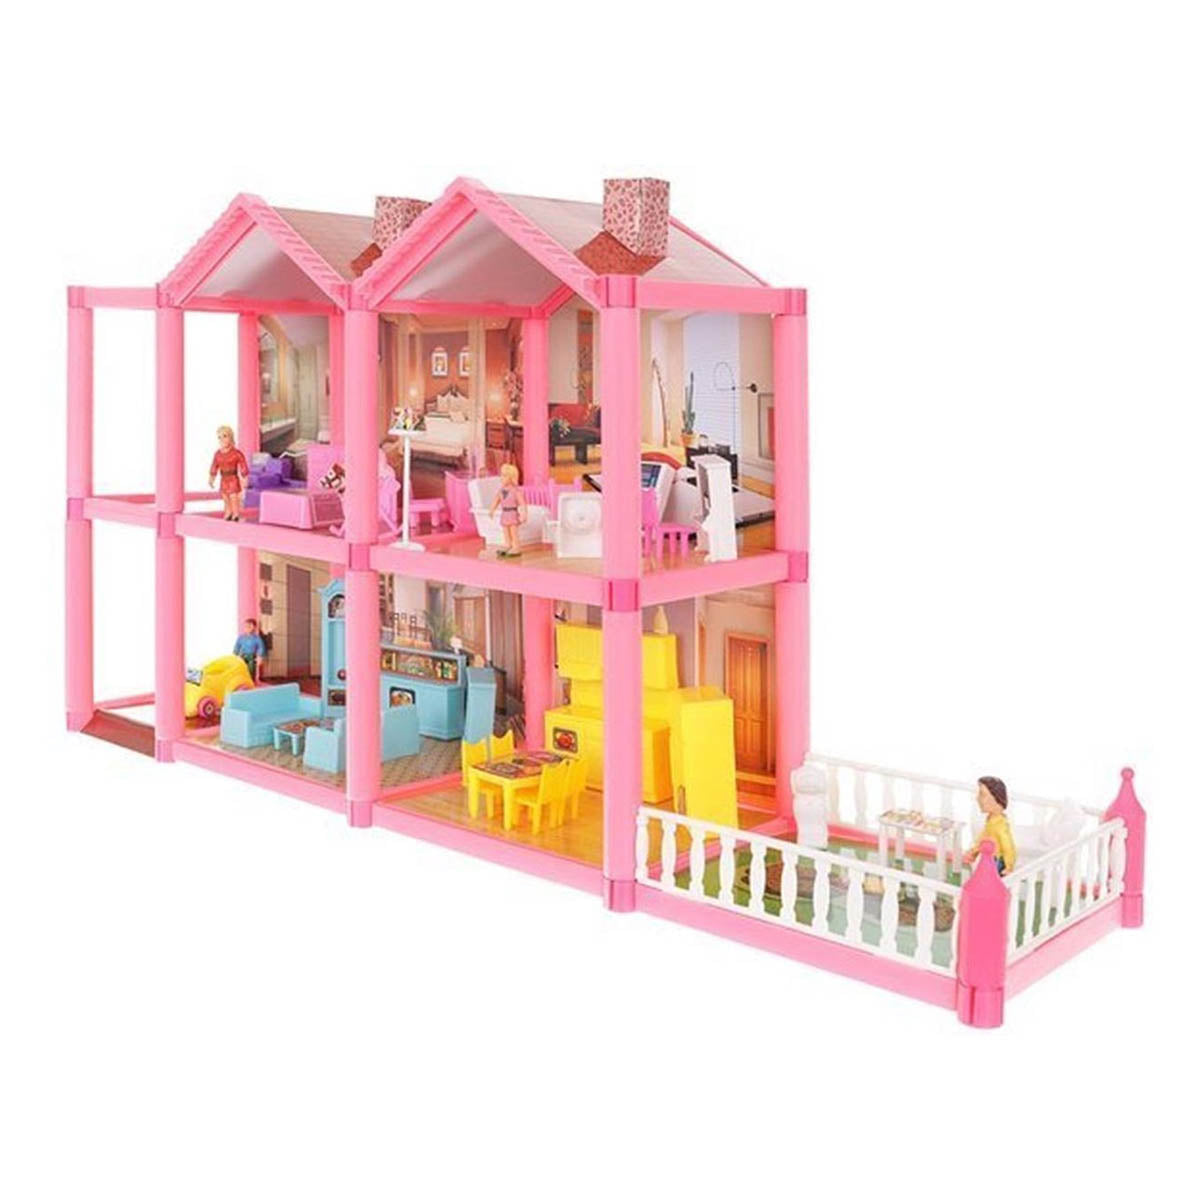 <tc>Ariko</tc> XL Dollhouse | Dream House | 6 rooms and terrace| 136 pieces fully furnished with 4 dolls and 1 dog